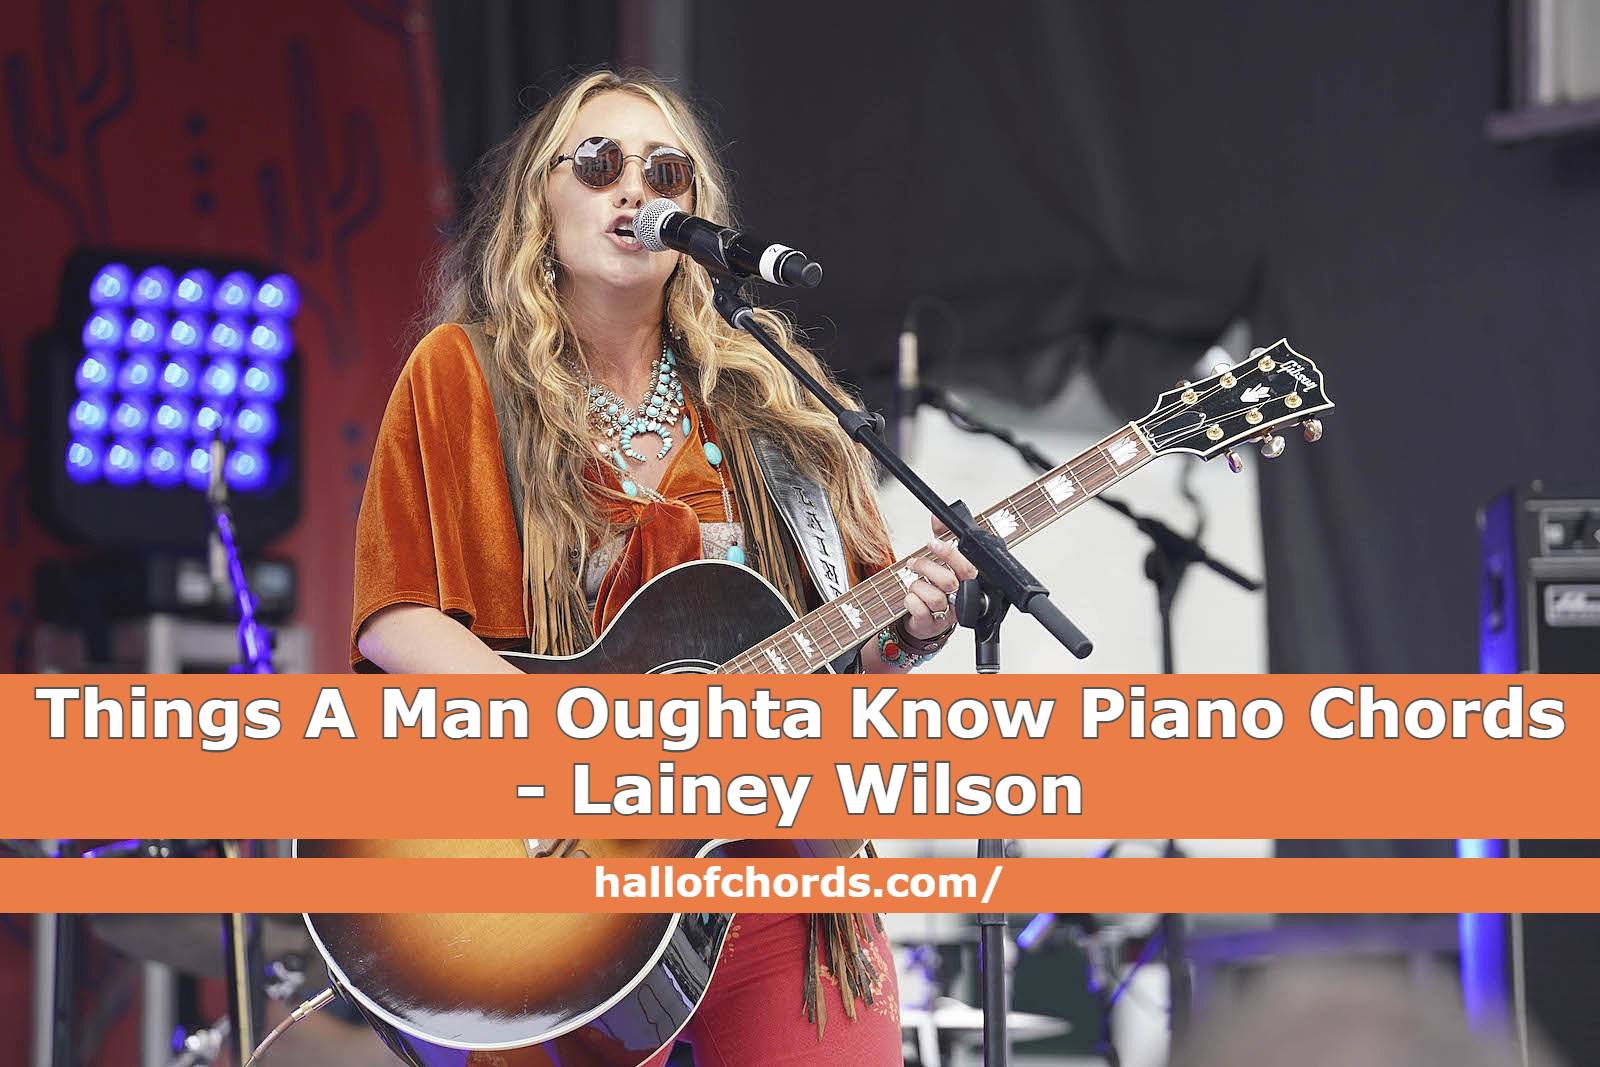 Things A Man Oughta Know Piano Chords Lainey Wilson